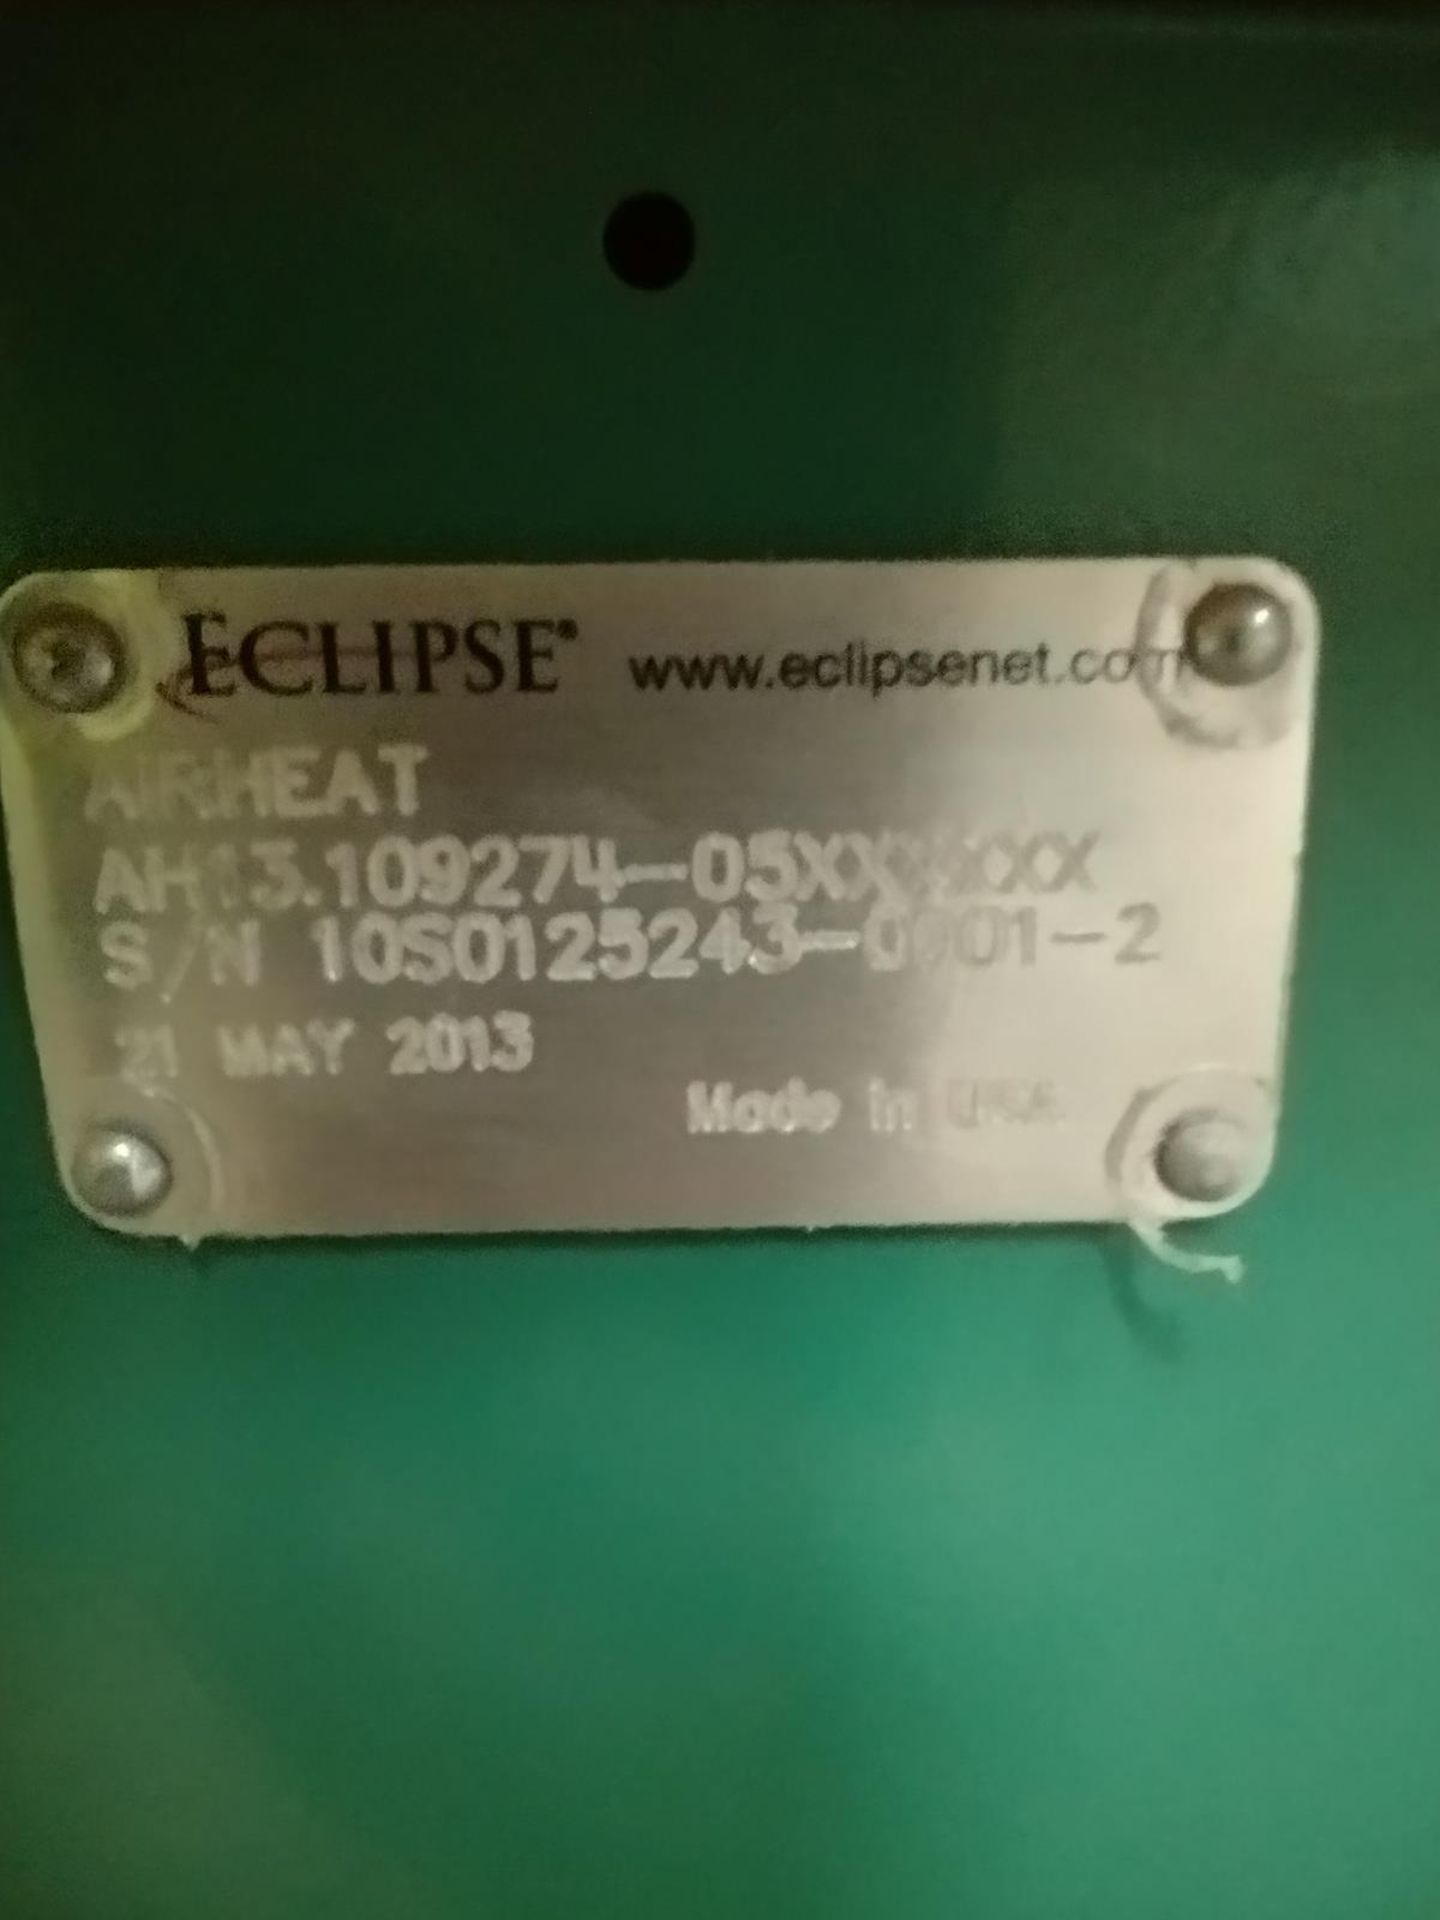 Eclipse AIRHEAT Air Heating Burner, serial no. 10S0125243-0001-2, year of manufacture 2013. Lot - Image 6 of 7